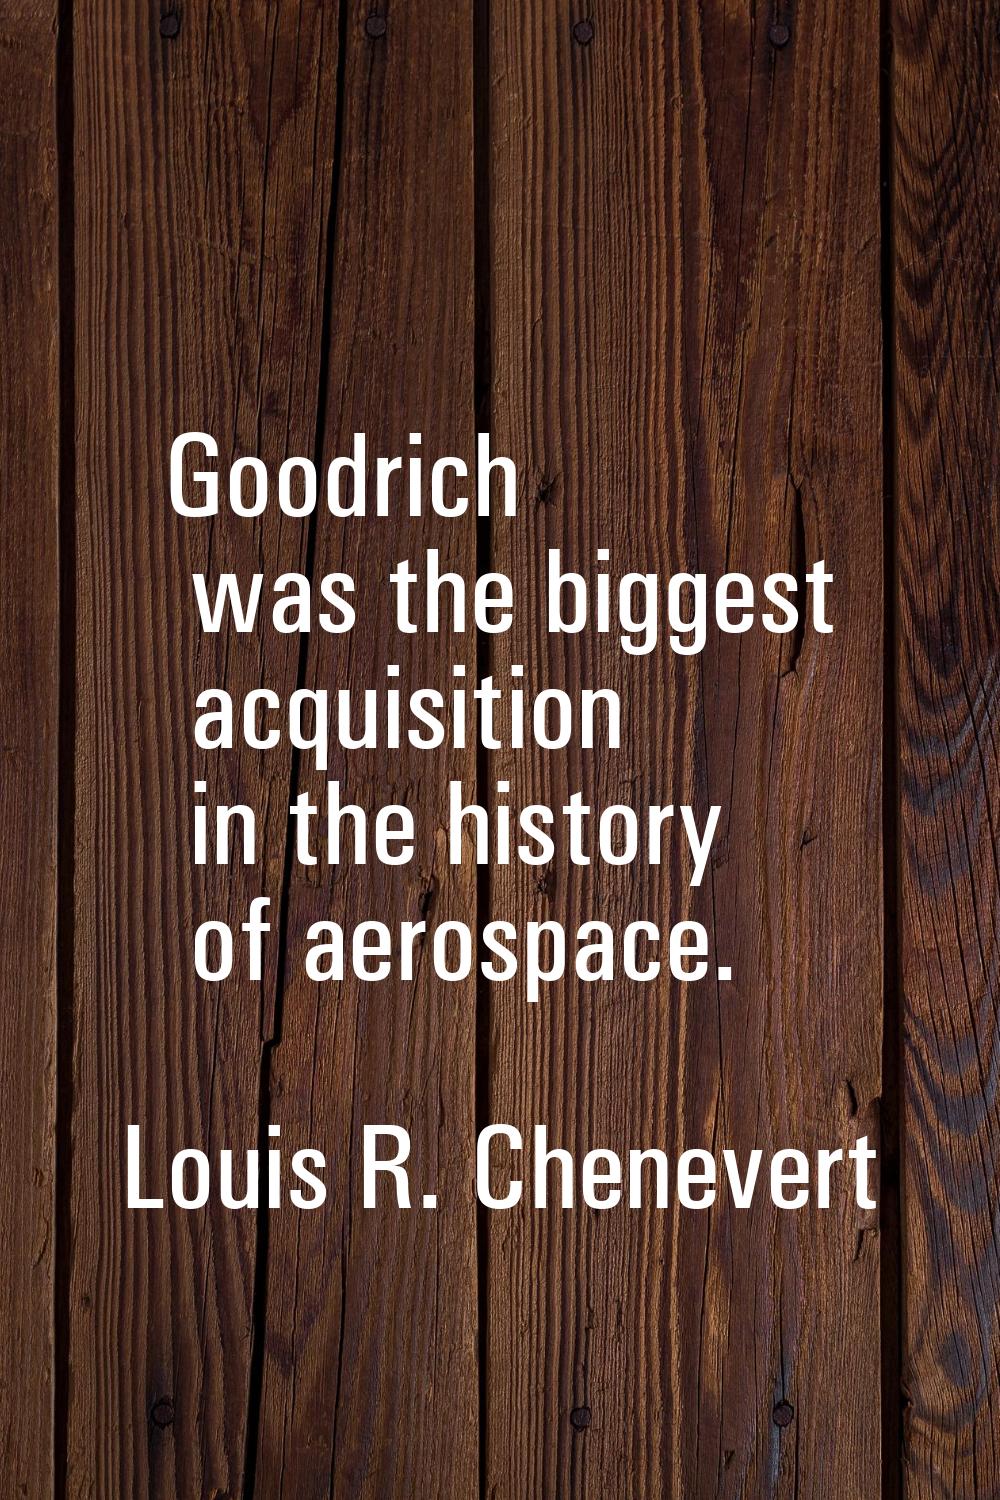 Goodrich was the biggest acquisition in the history of aerospace.